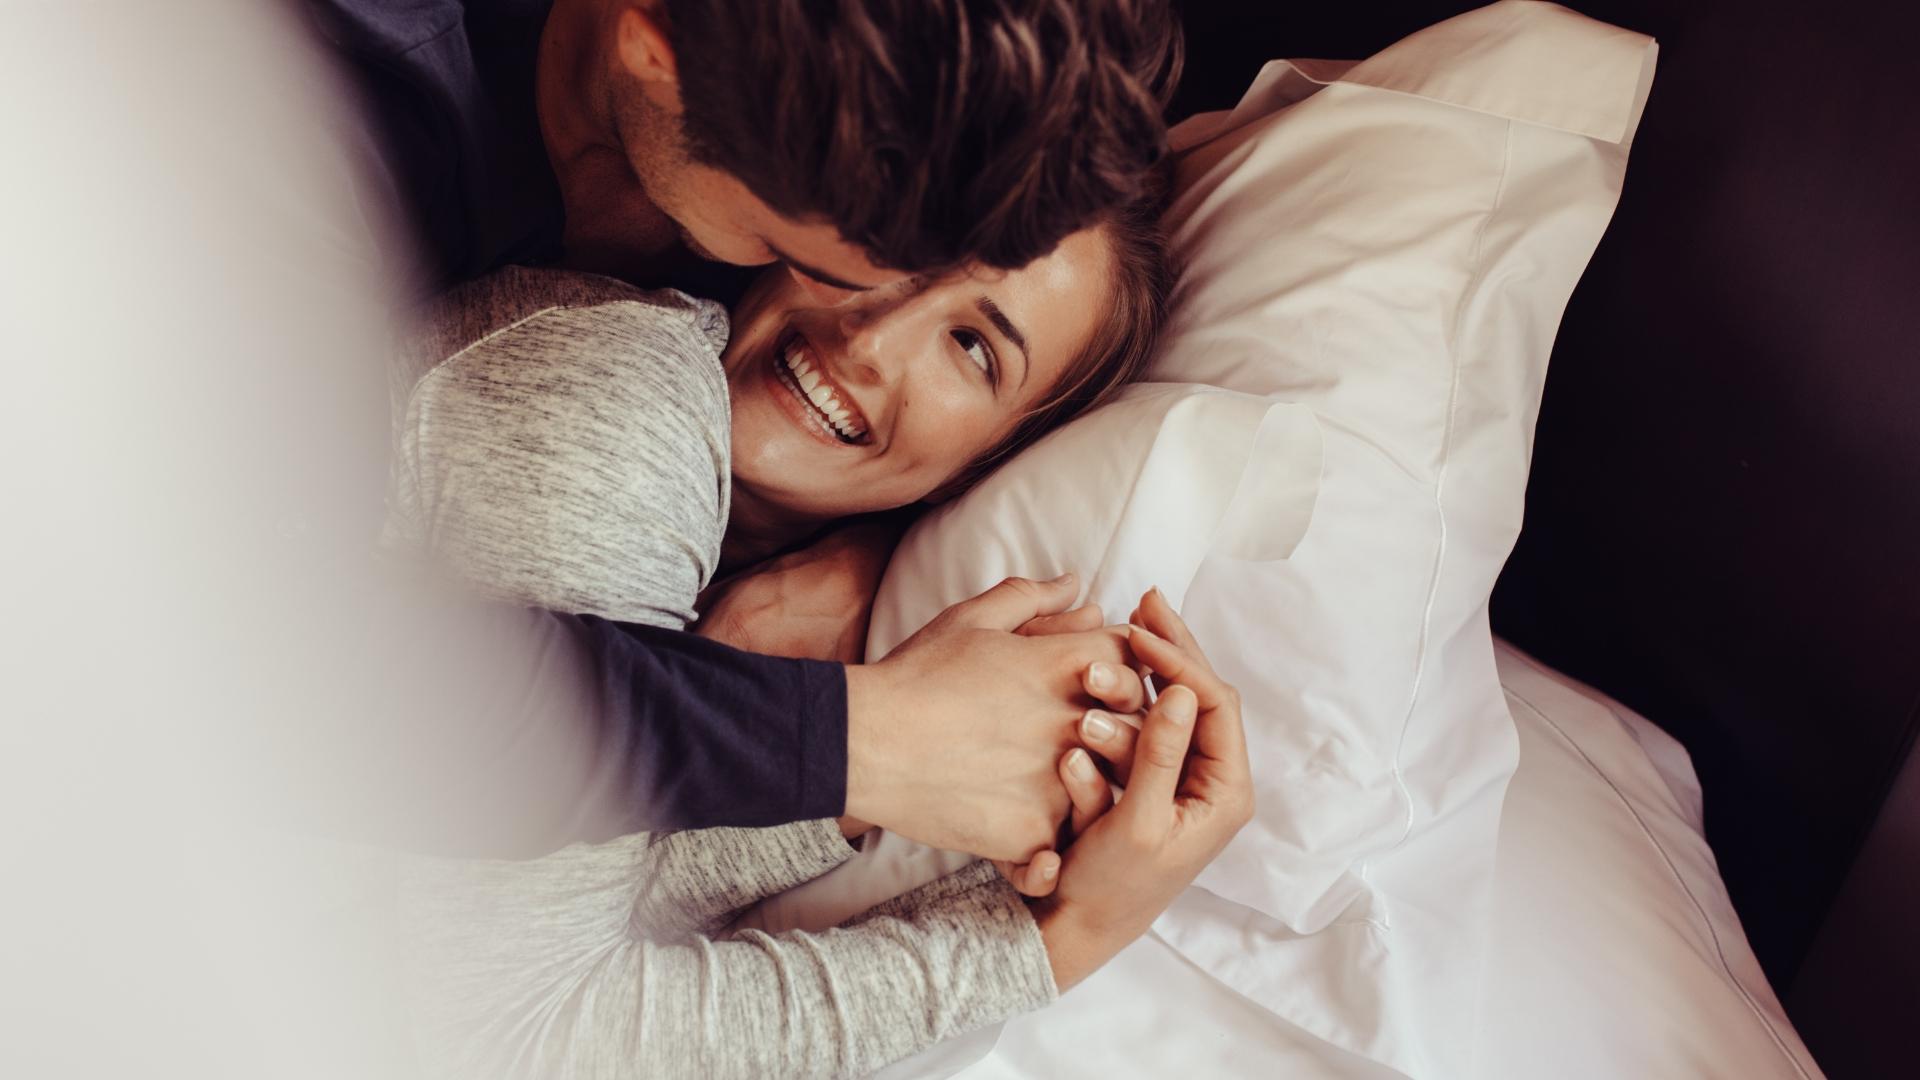 A happy couple cuddling in bed, smiling and holding hands.